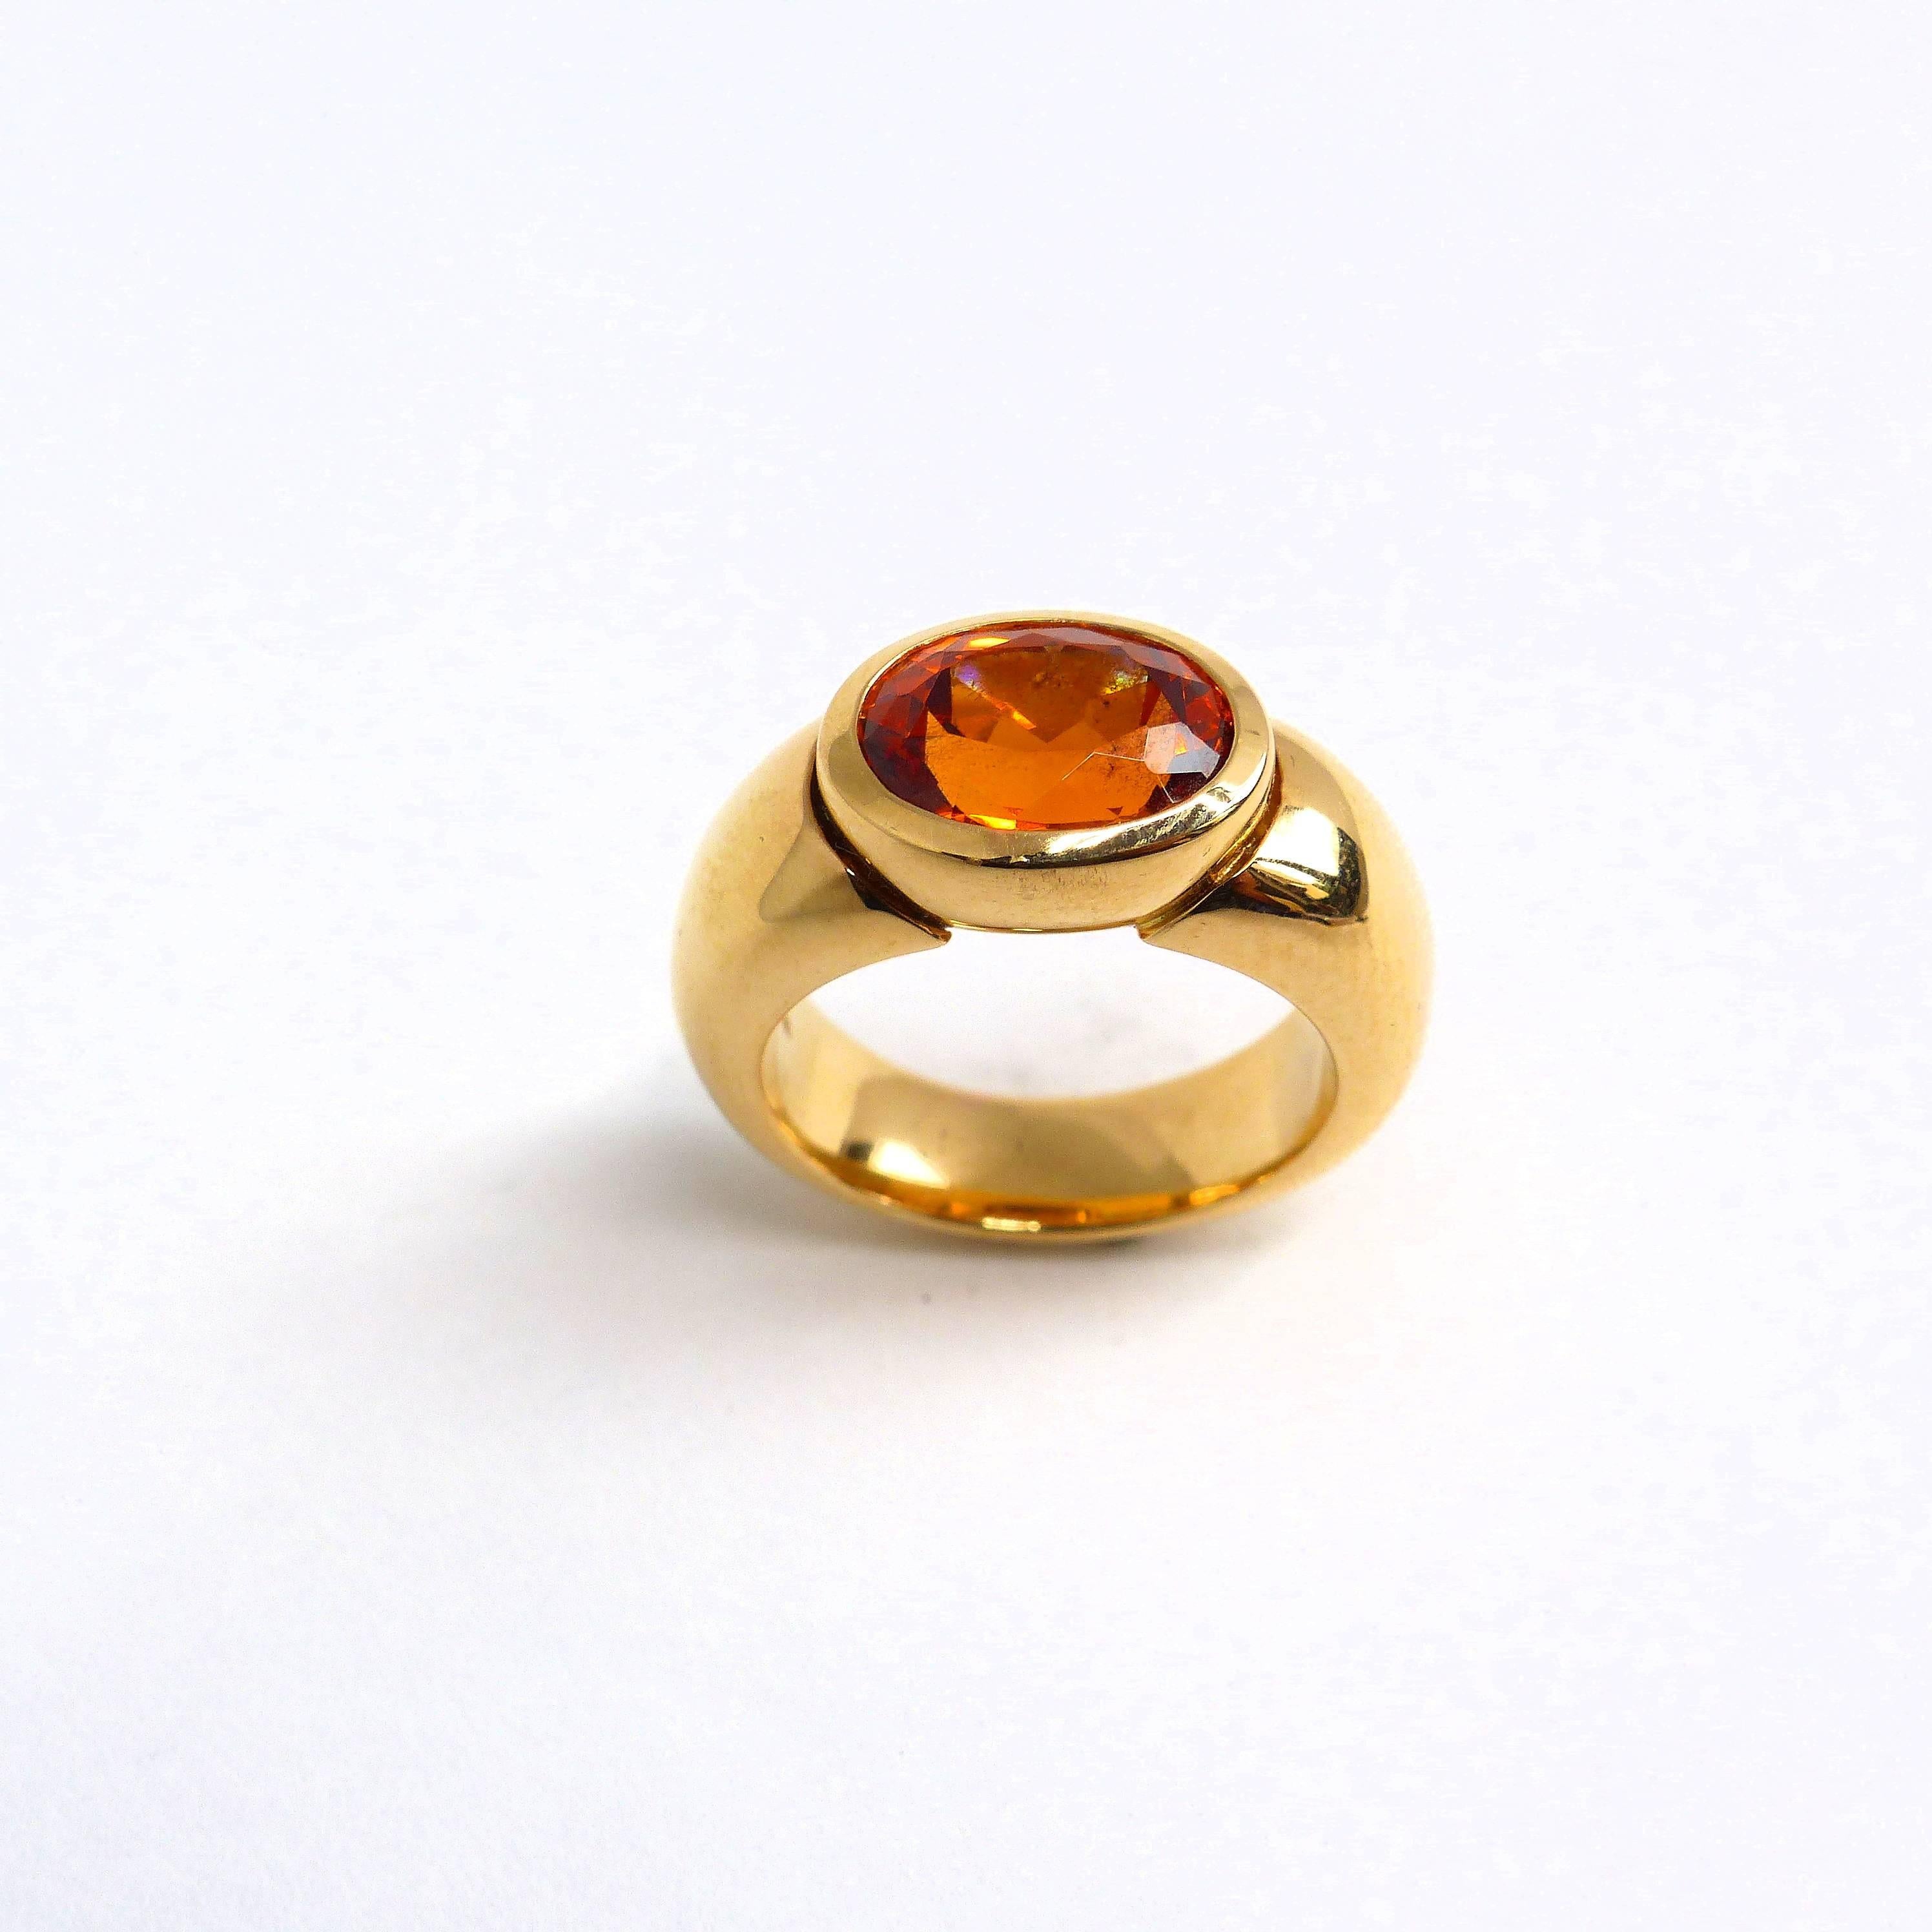 Thomas Leyser is renowned for his contemporary jewellery designs utilizing fine gemstones. 

This 18k rose gold (20.05) ring is set with 1x fine Mandarin Garnet (facetted, oval 11x8.5mm, 4.65cts). 

Ringsize: 6 3/4 (54)